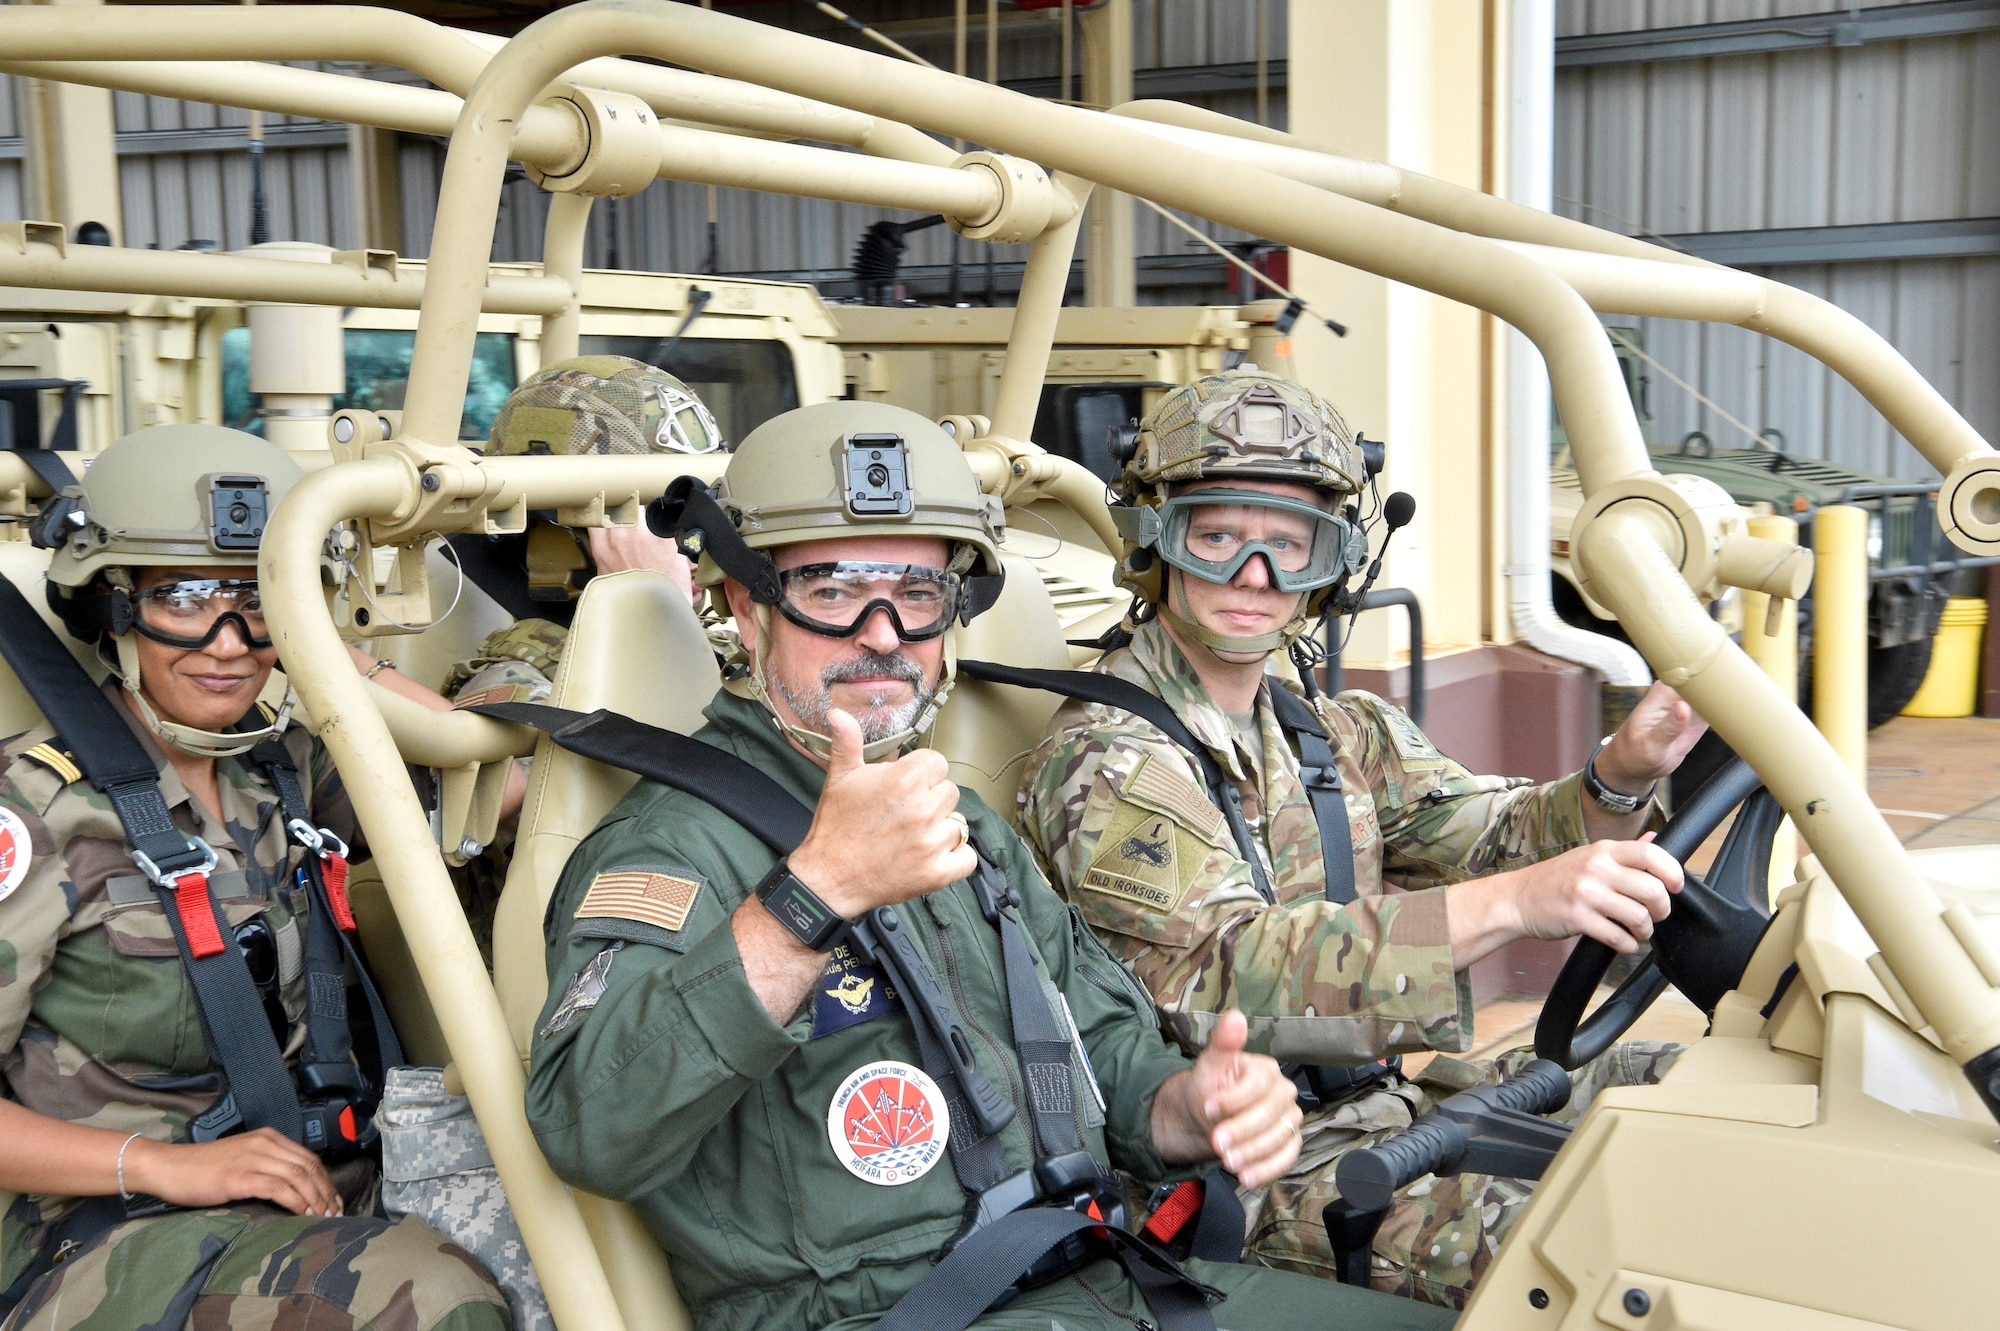 French Air Force Gen. Louis Pena, talks with the members from the 25th Air Support and Operations Squadron to learn about the mission of the Tactical Air Control Party Airmen at Wheeler Army Airfield, Hawaii, June 30, 2021. Pena was briefed on the capabilities of the 25th ASOS and given a demonstration of the Polaris MRZR, a multi-terrain vehicle used by TACP Airmen. (U.S. Air Force photos by 1st Lt. Benjamin Aronson)